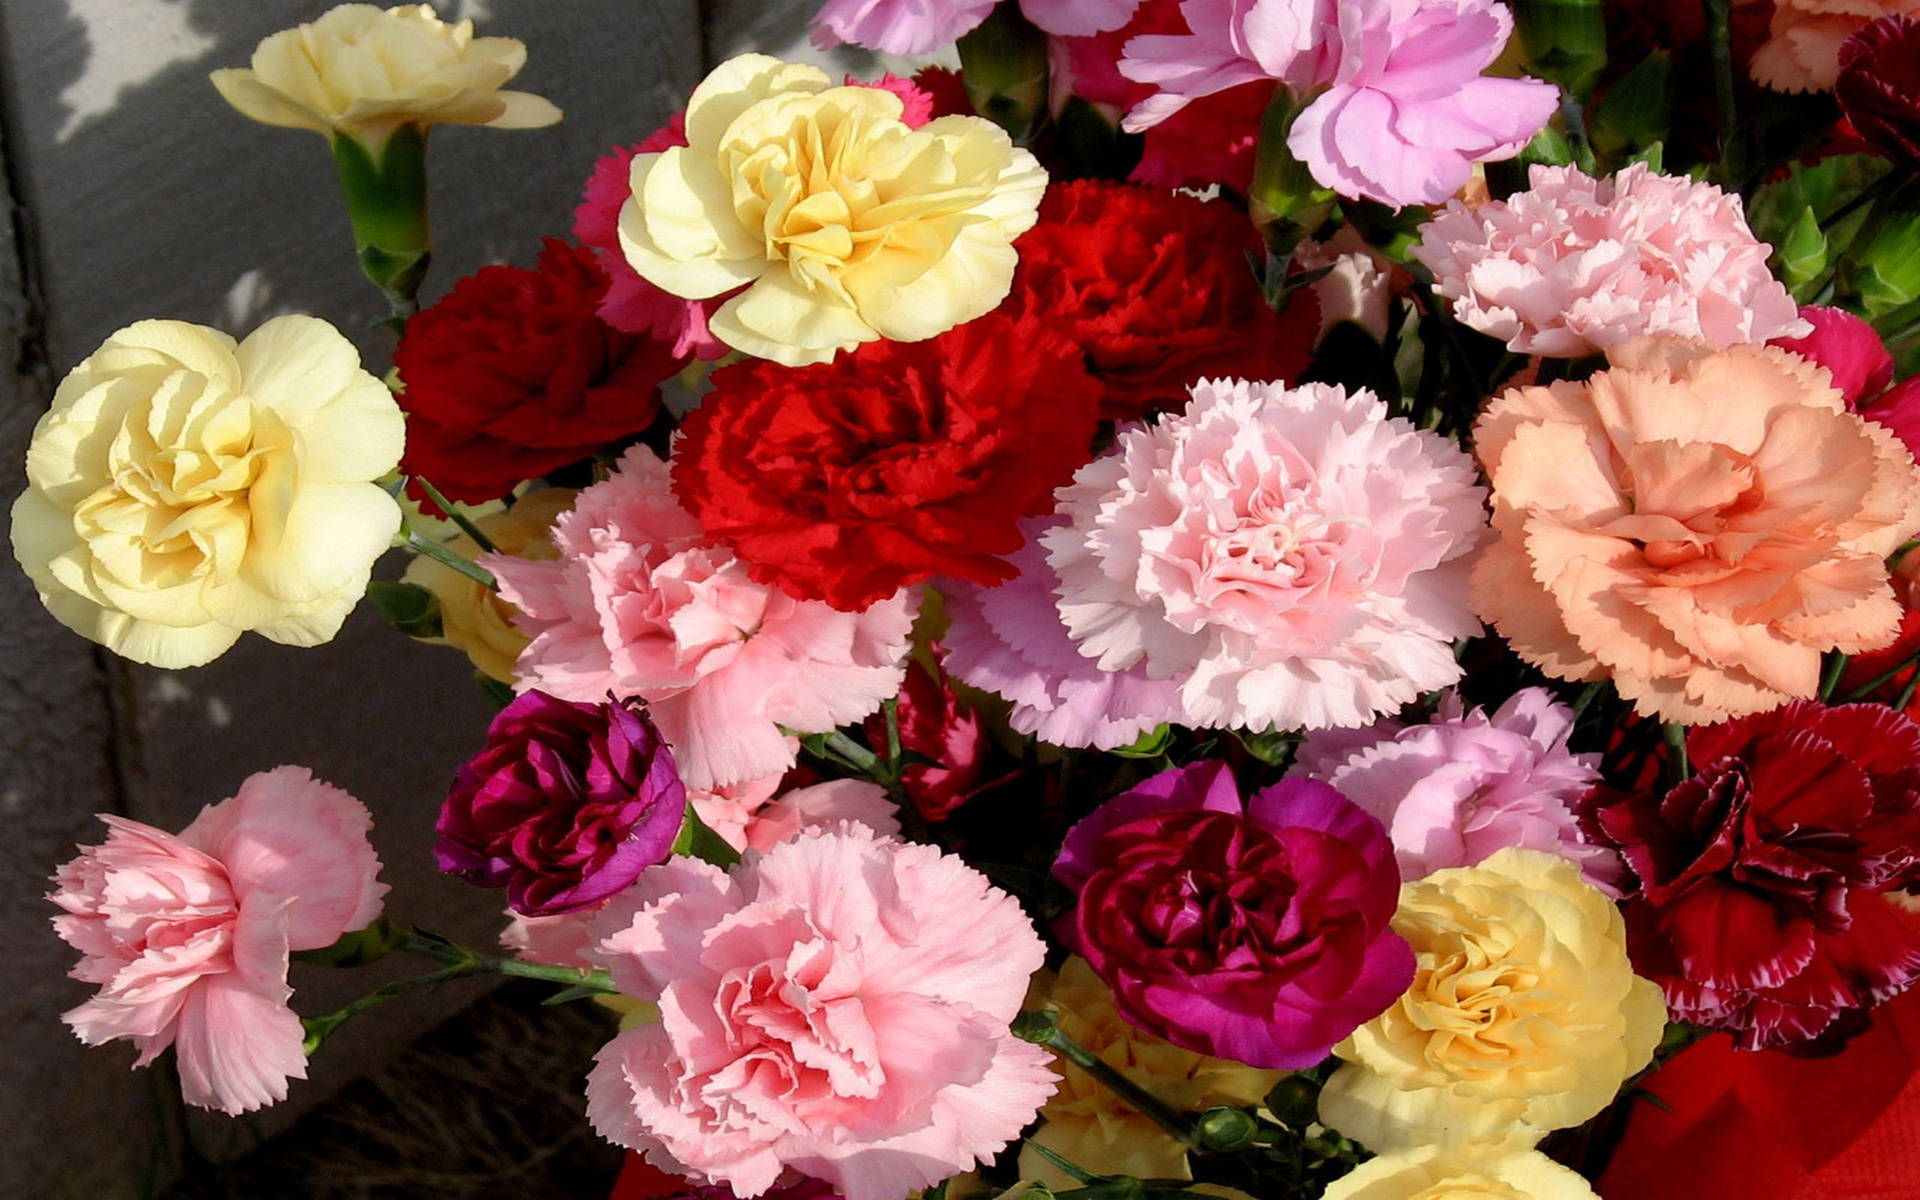 Assorted Carnation Flowers Background